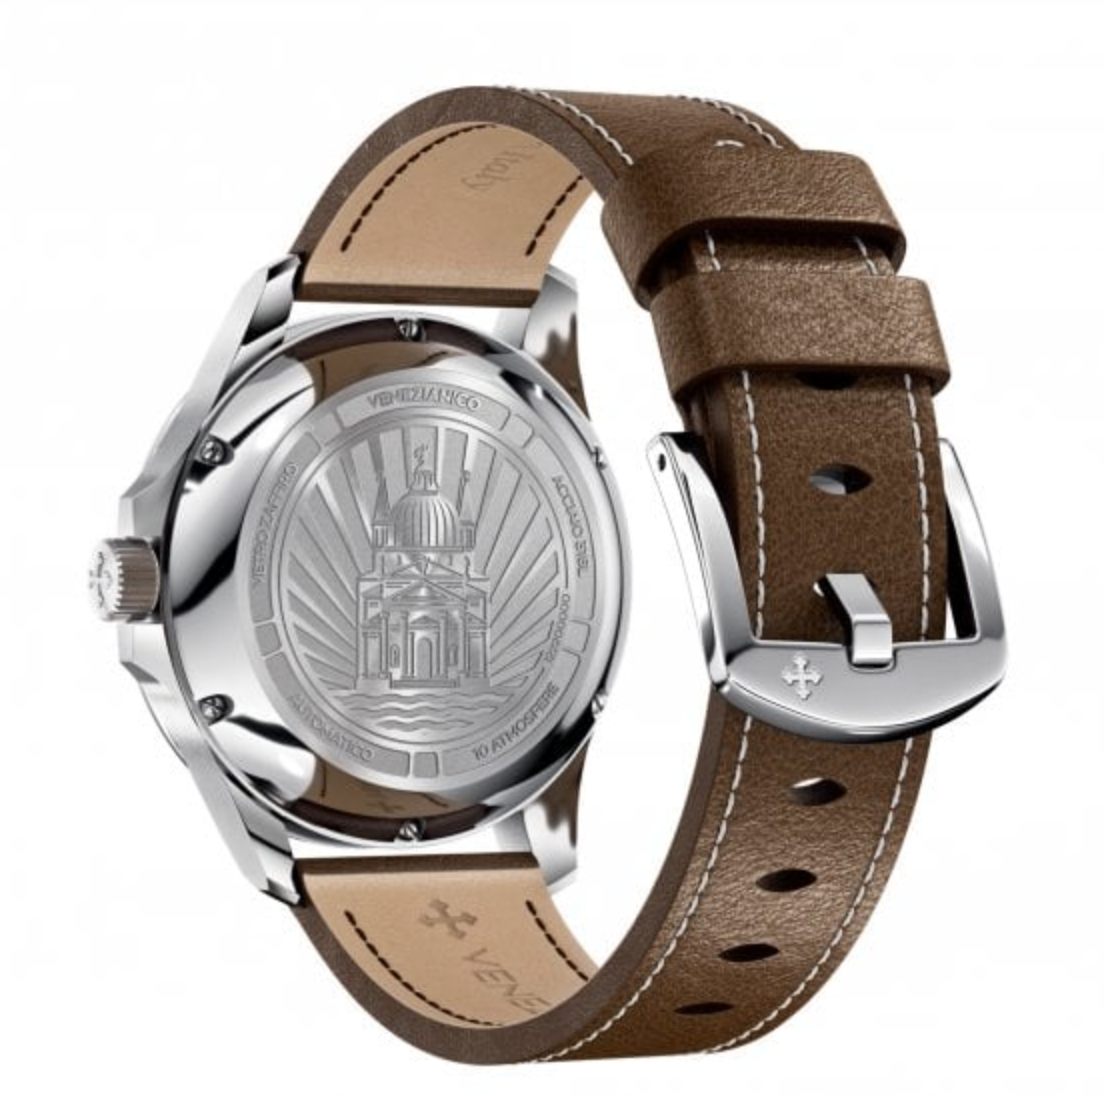 Venezianico Automatic Watch Brown Leather Redentore 40 1221505